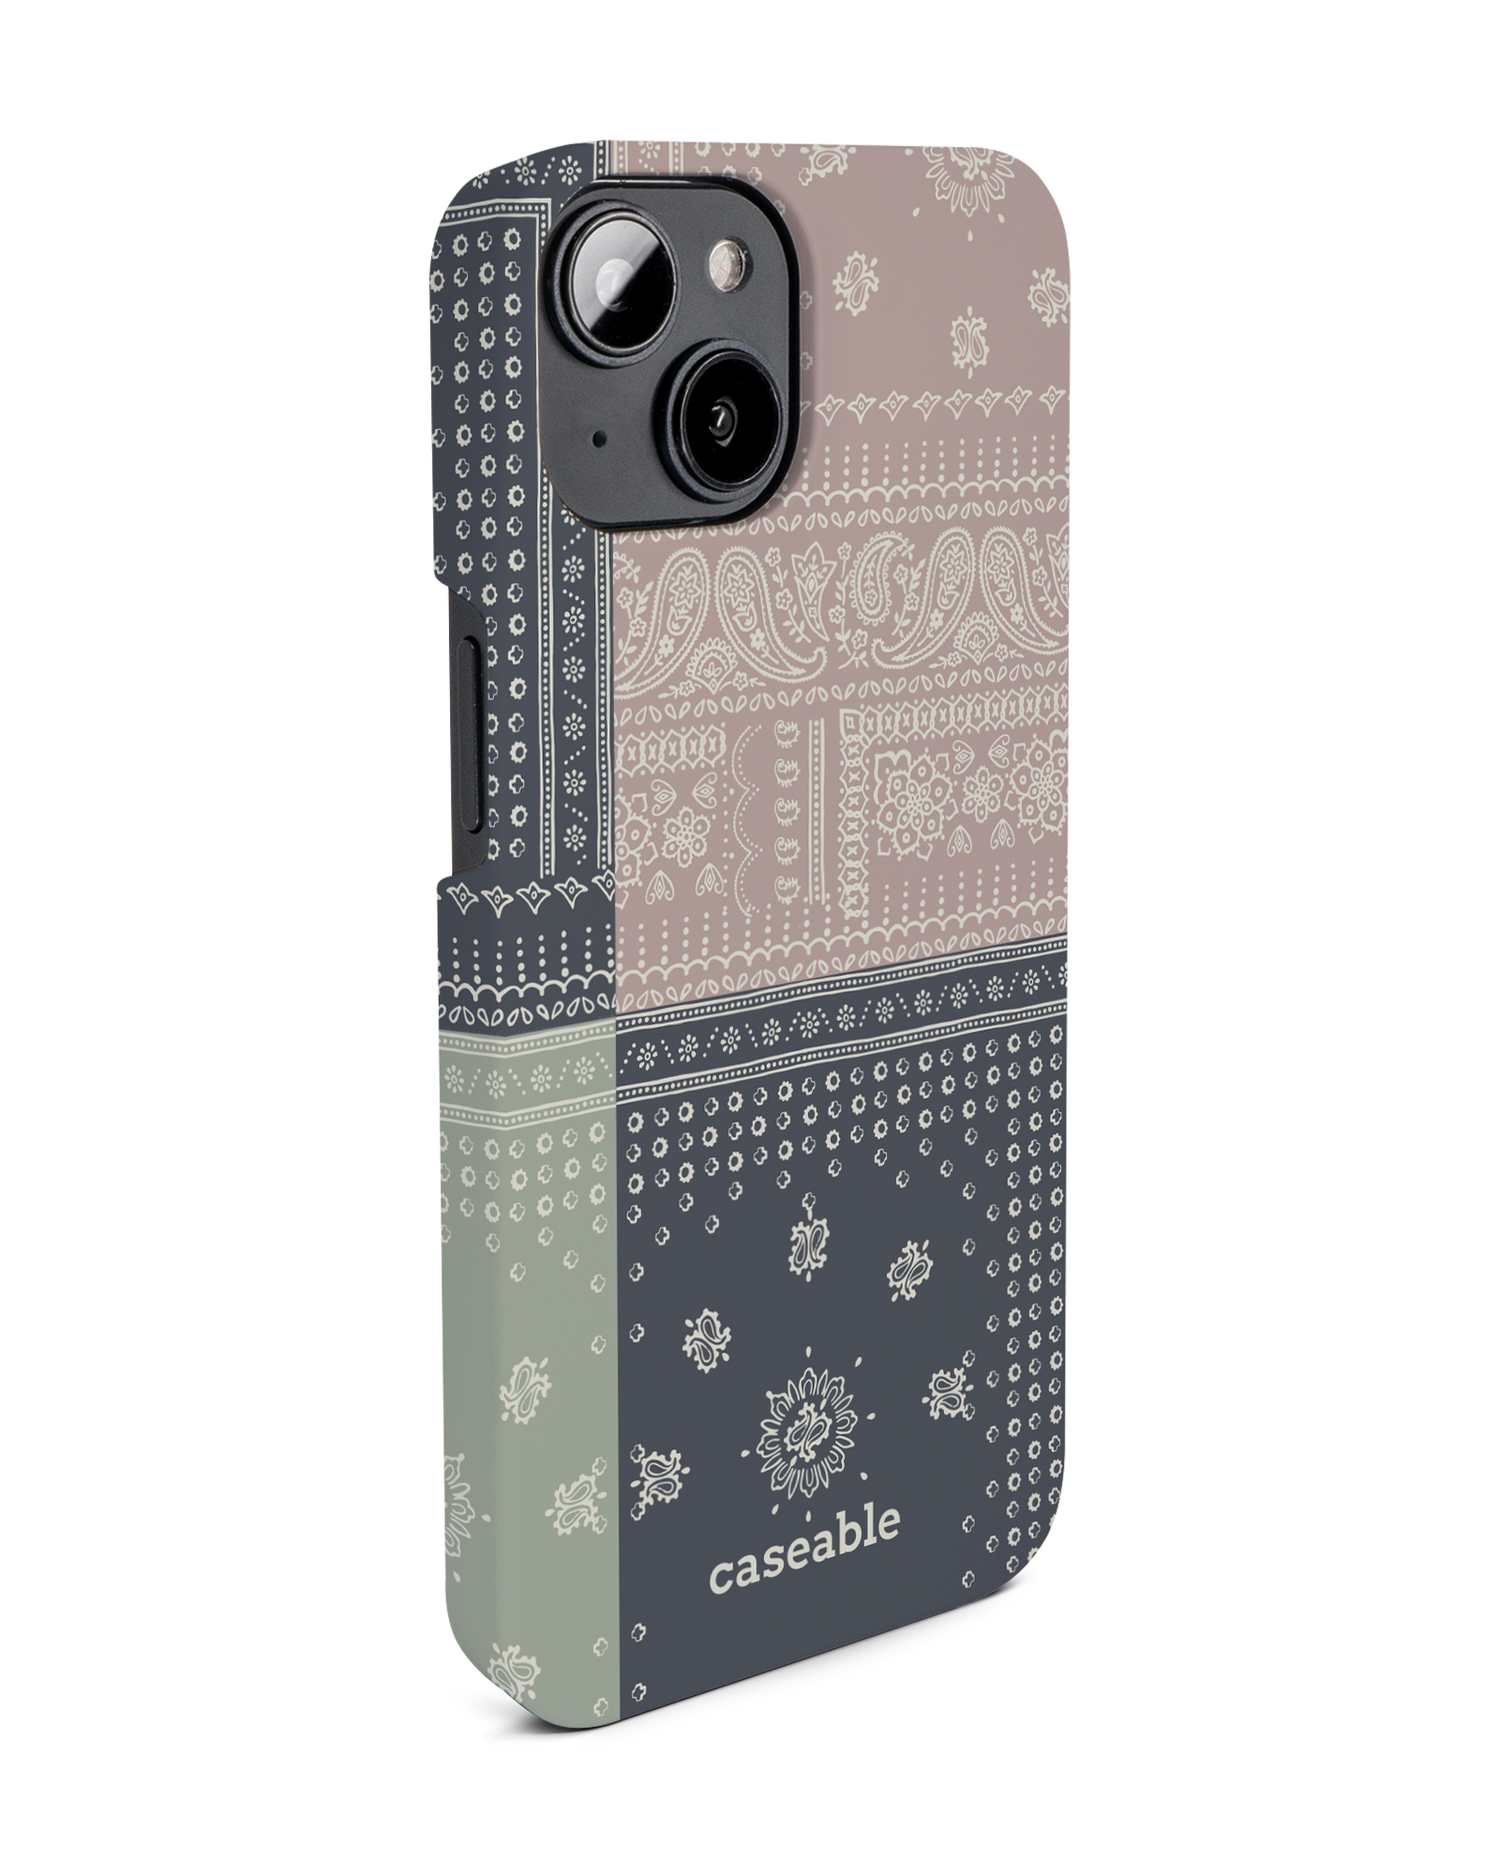 Bandana Patchwork Hard Shell Phone Case for Apple iPhone 14: View from the left side